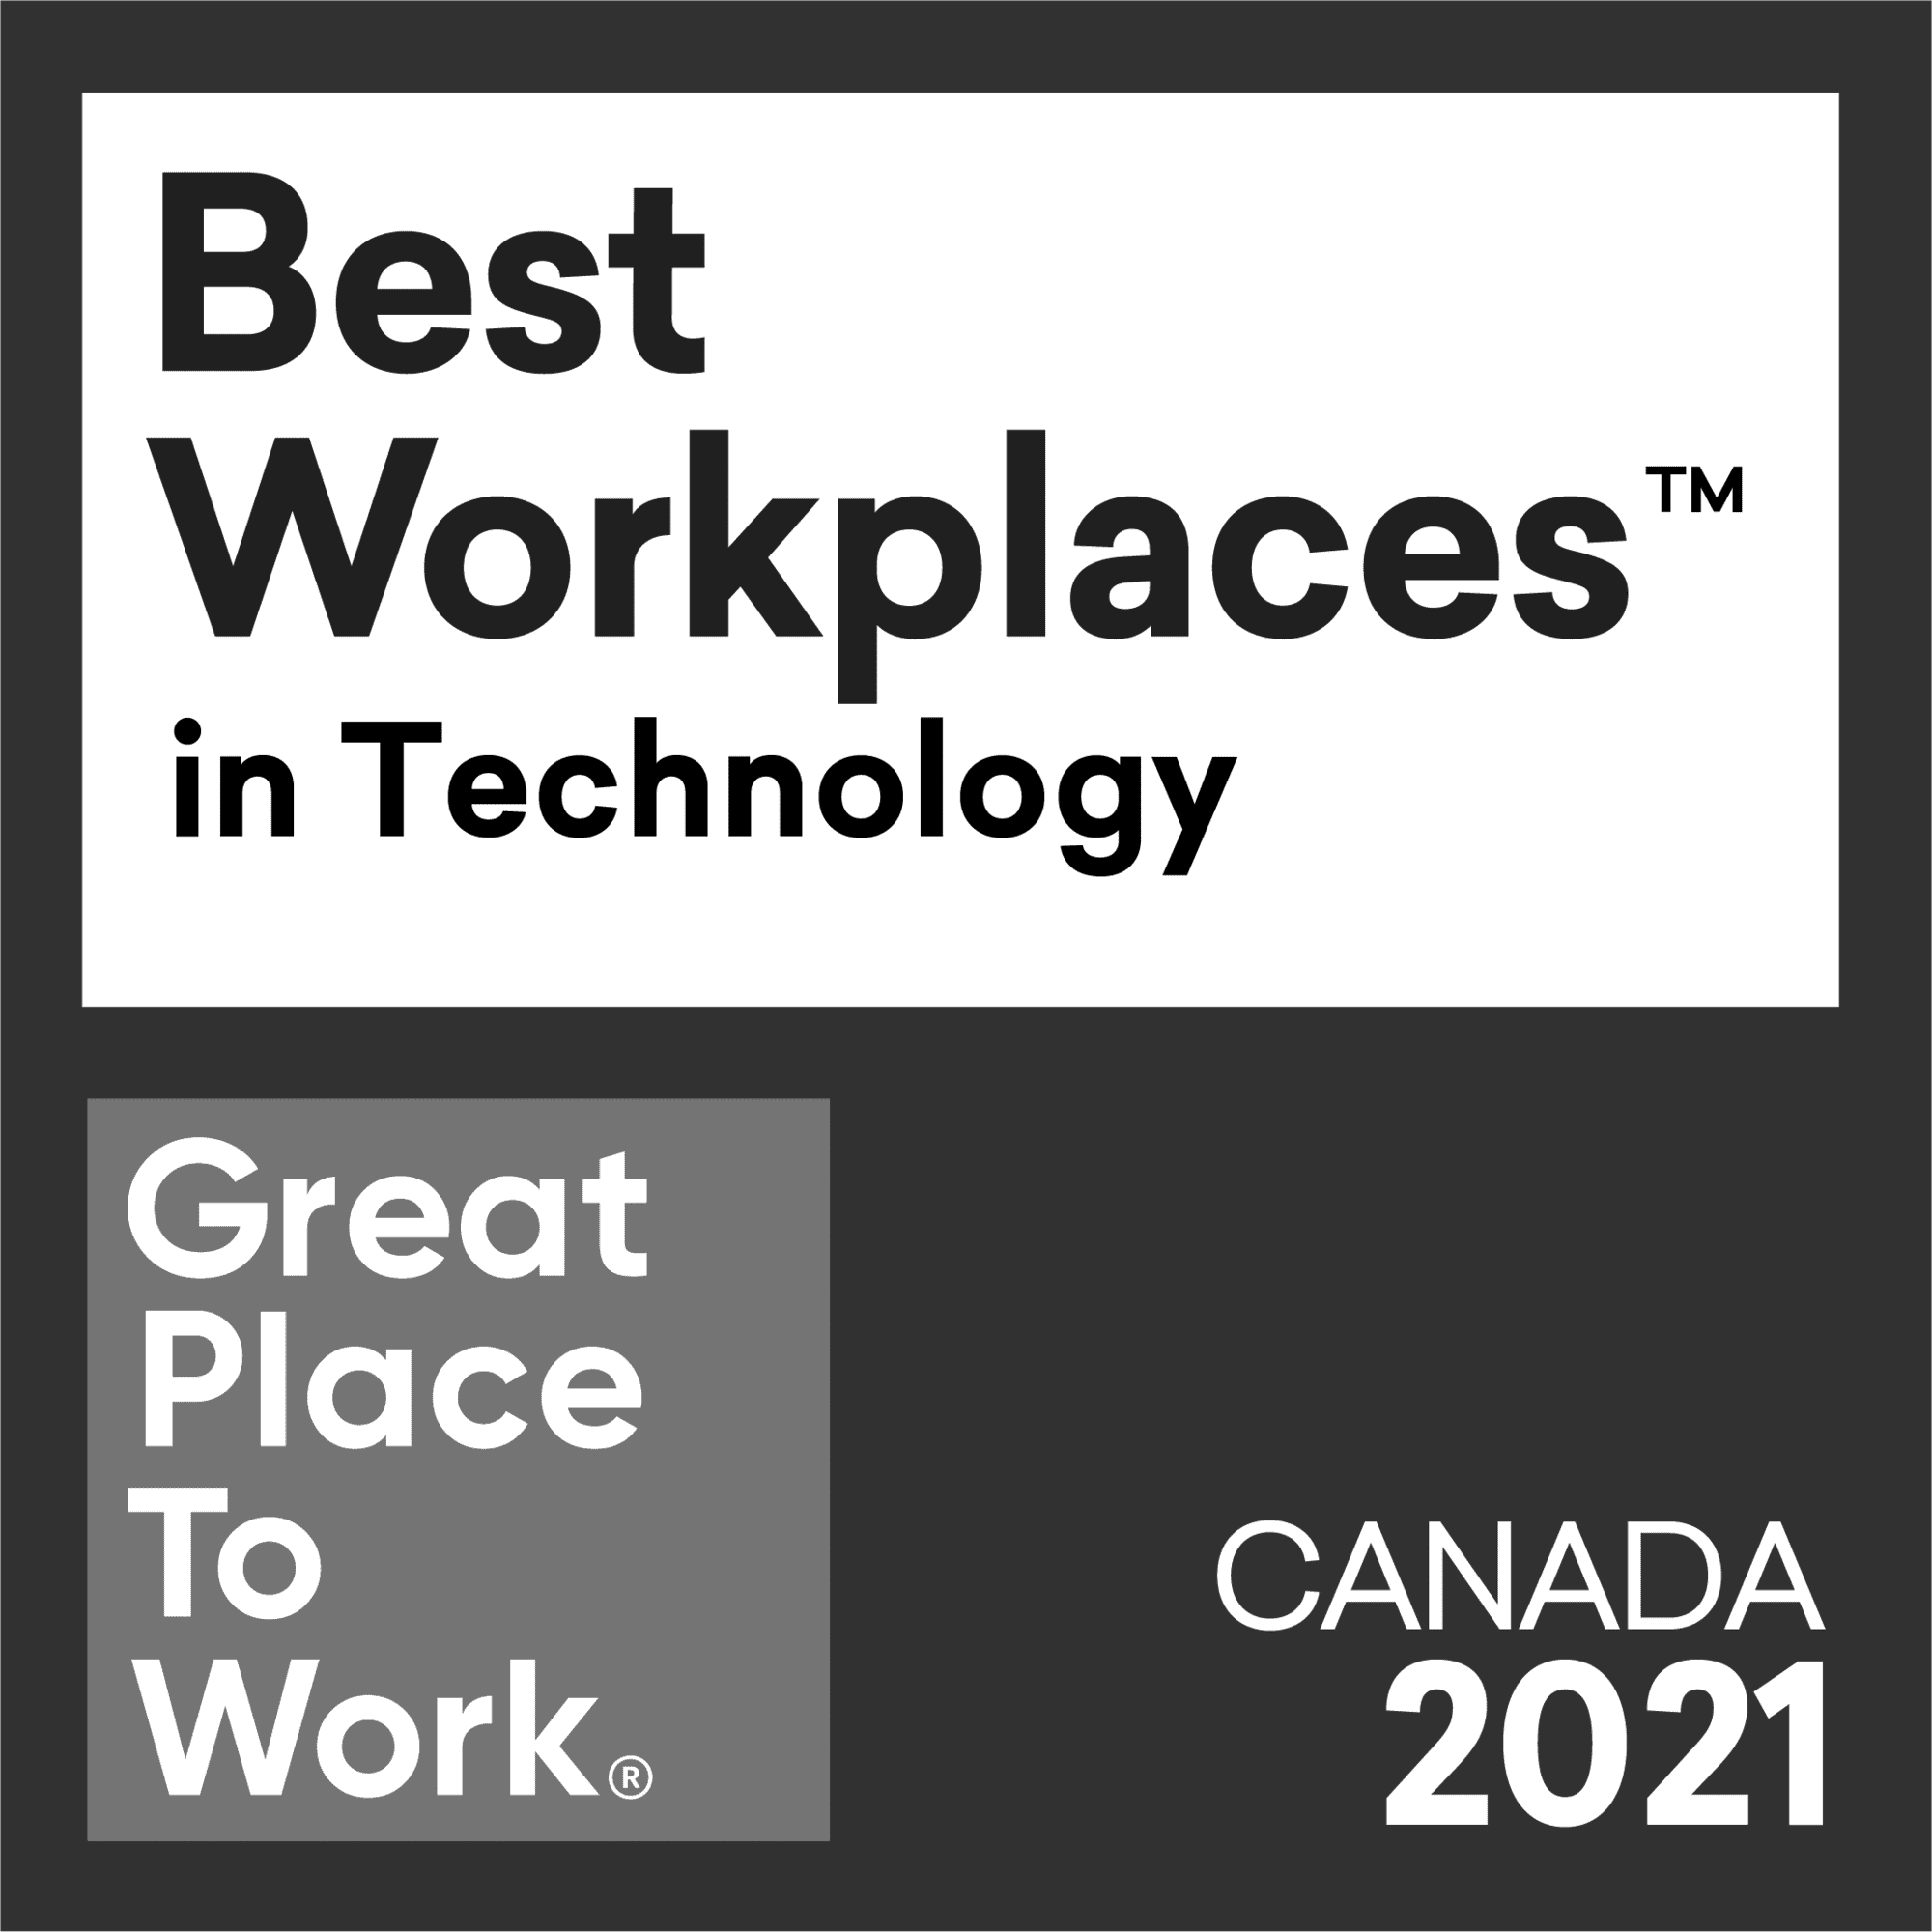 Best Workplaces in Canada